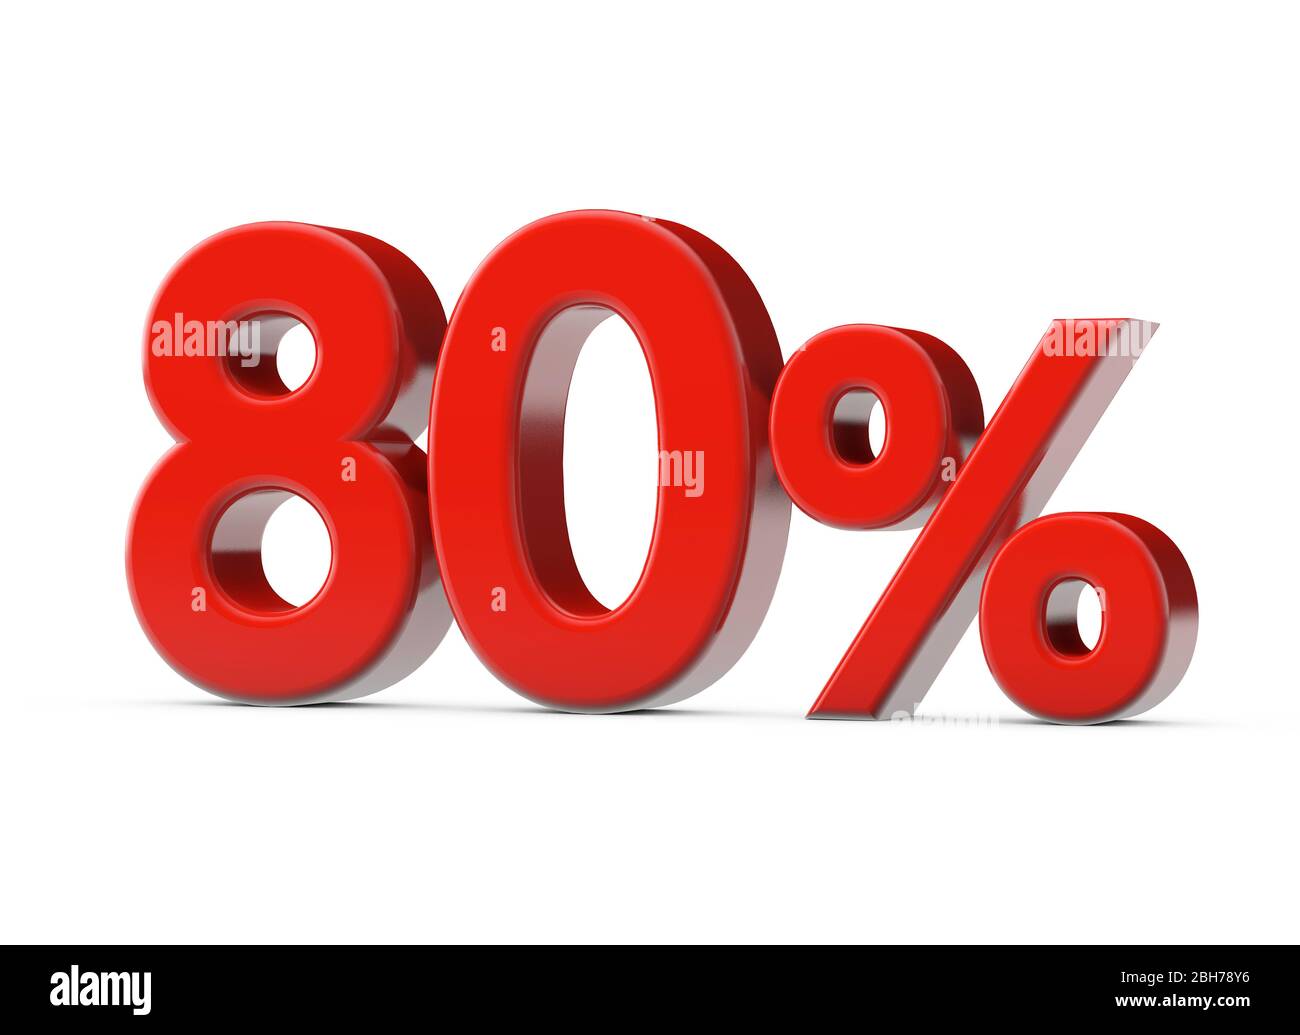 80 percent red promotional sale sign. 3D Render Stock Photo